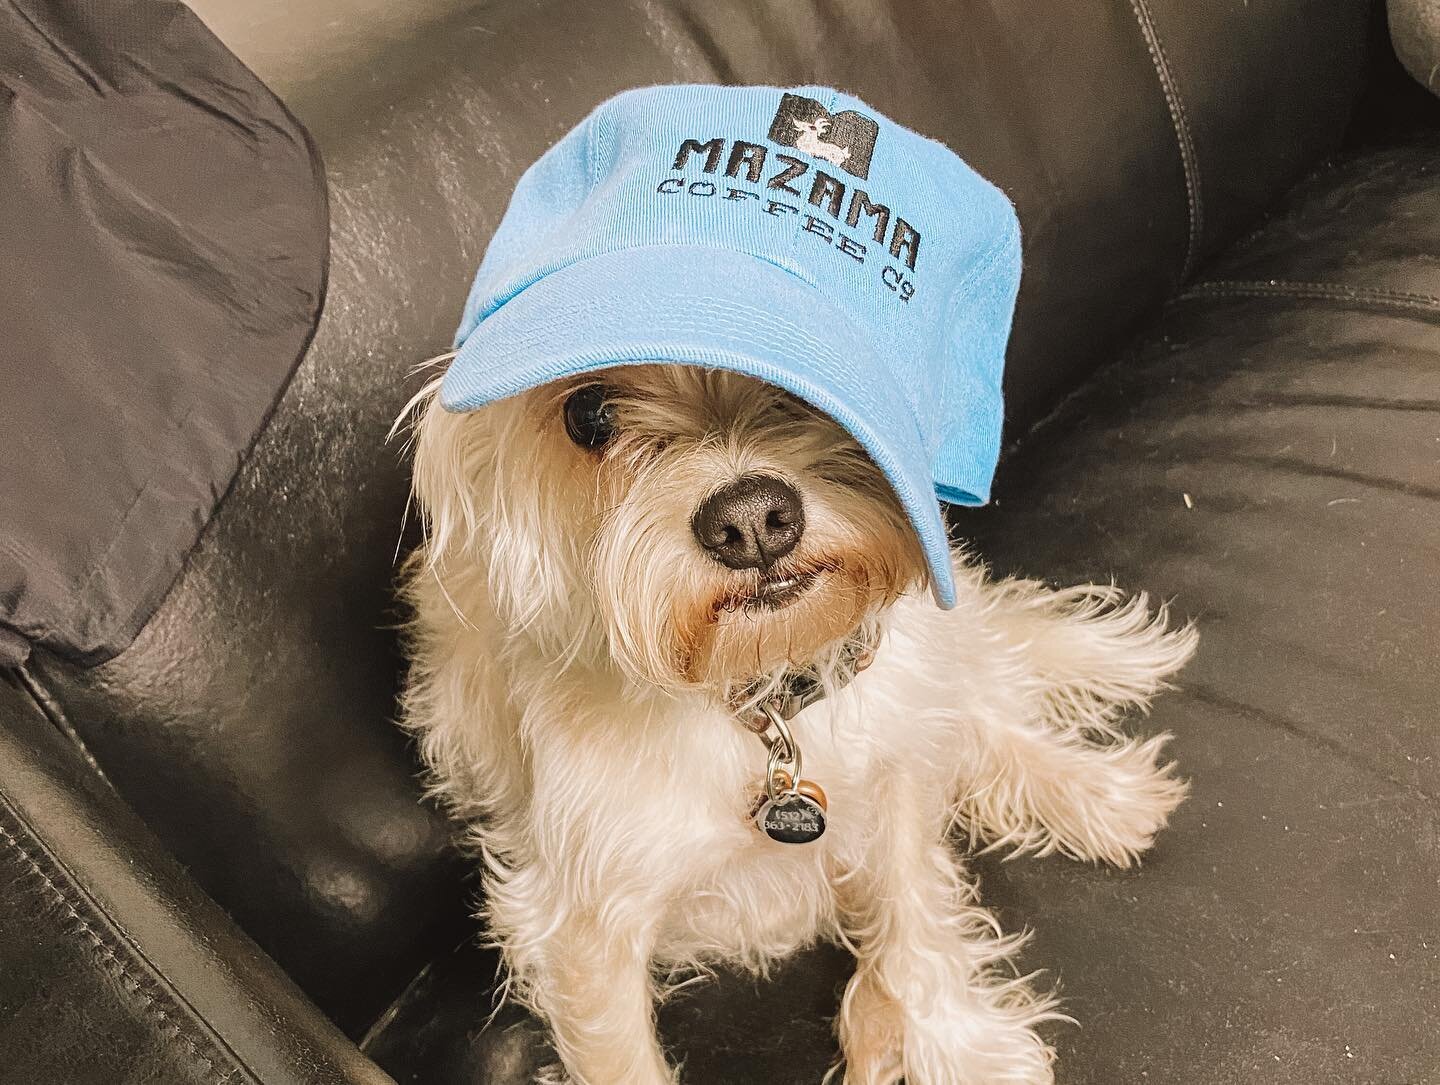 Don&rsquo;t let Debbie Reynolds&rsquo; model face fool you, she loves our new hats! 🐶❤️ 3 colors - in shop now! 

#mazamacoffee #atxcoffee #austincoffee #drippingspringstx #drippingsprings #thisistexas #drinklocalcoffee